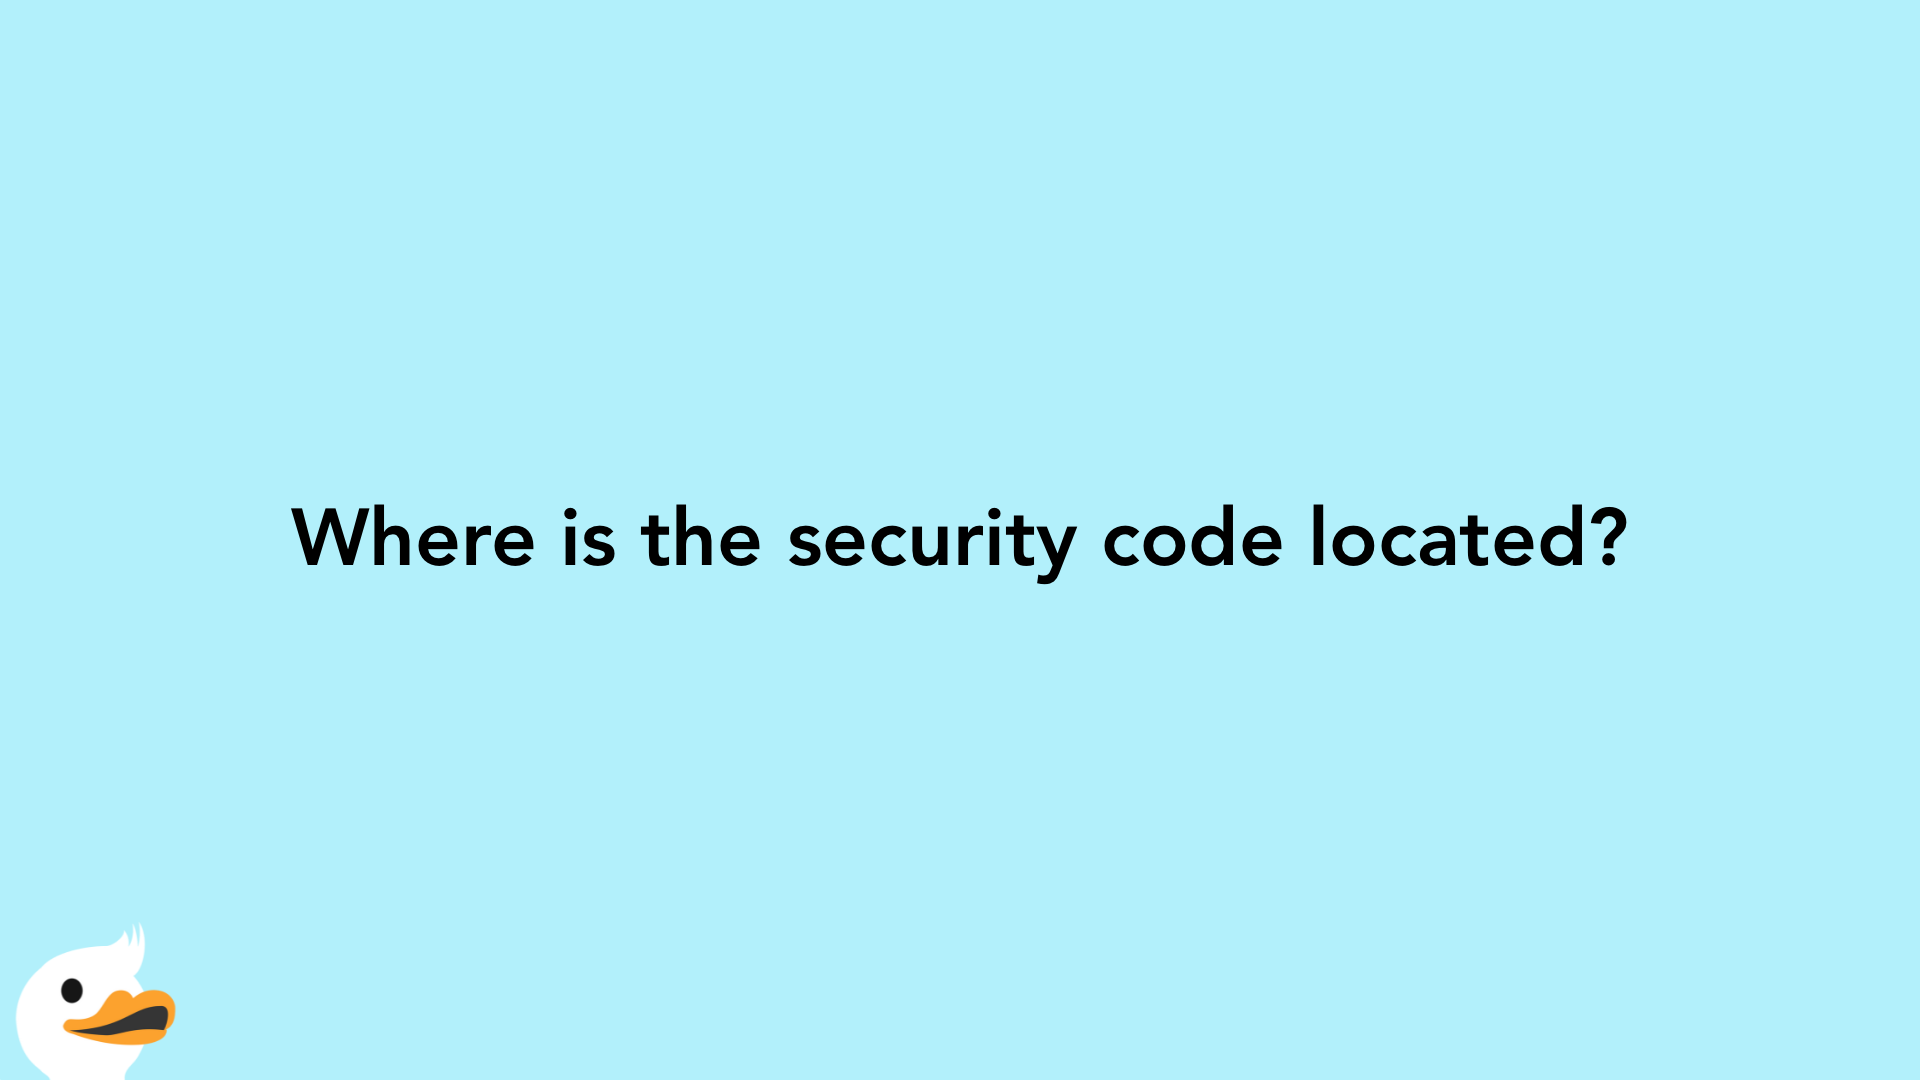 Where is the security code located?